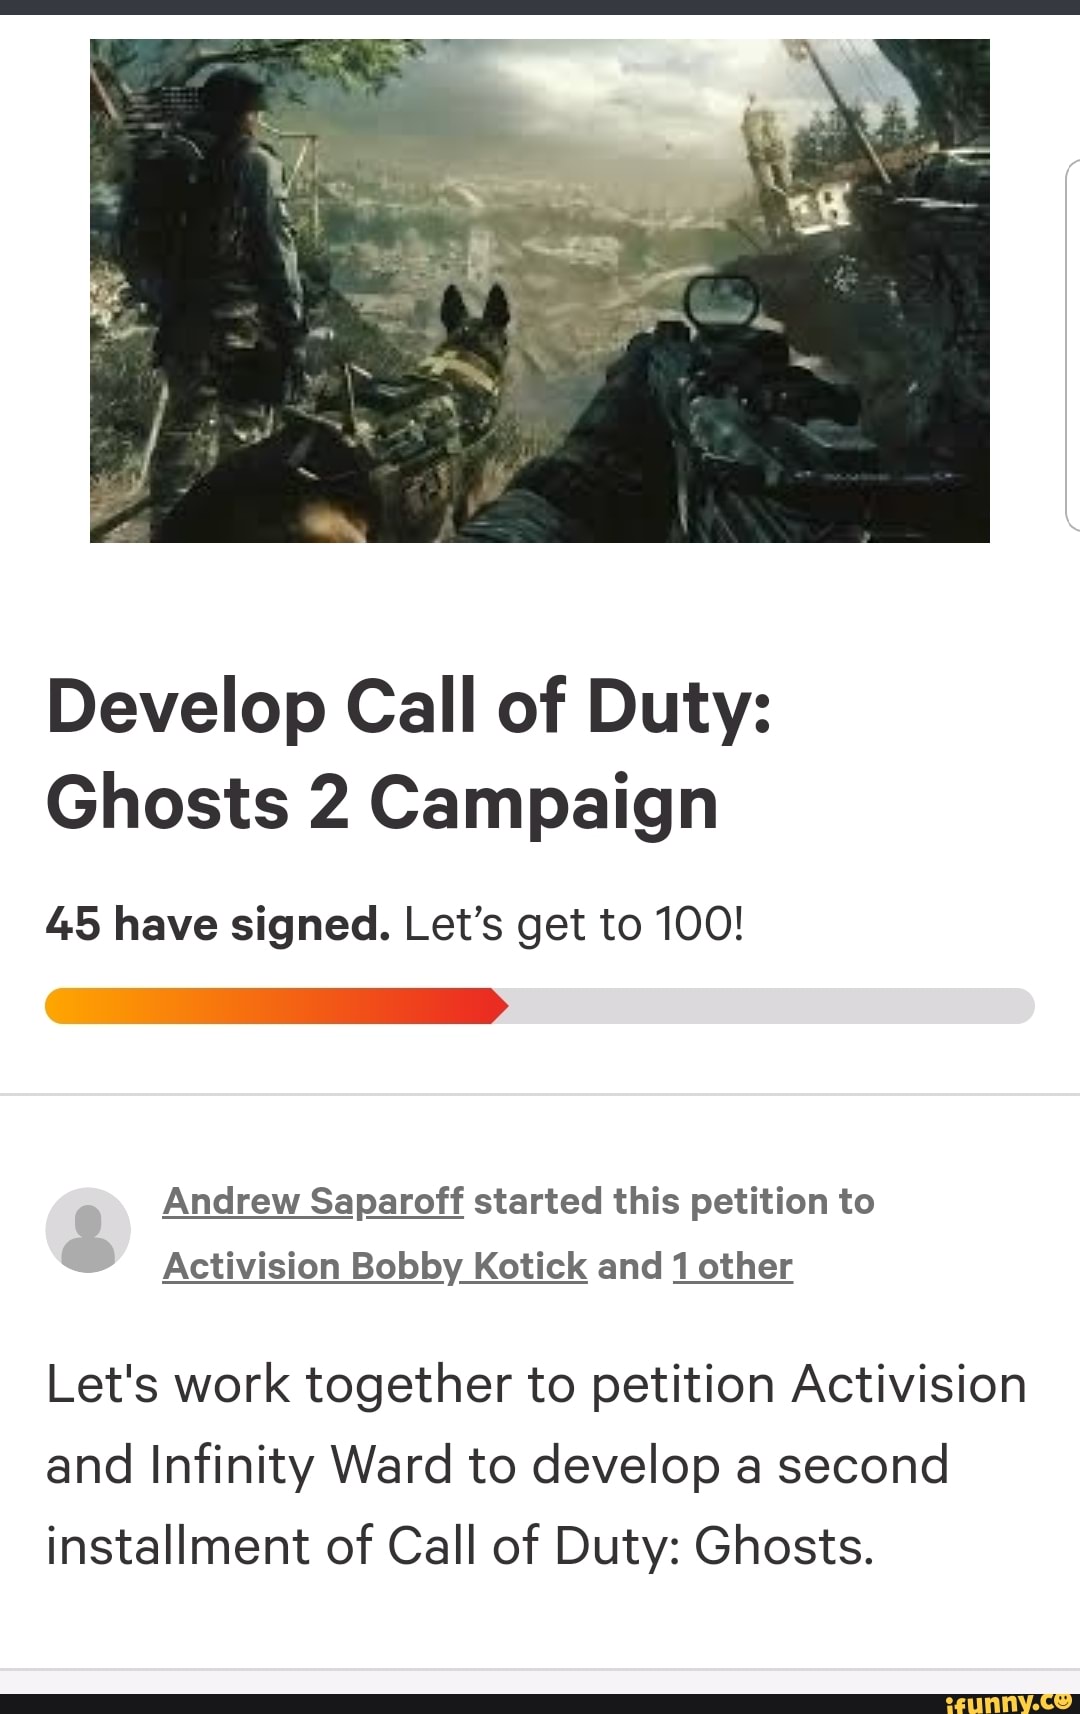 Petition · Make Call of Duty Ghosts 2 ·